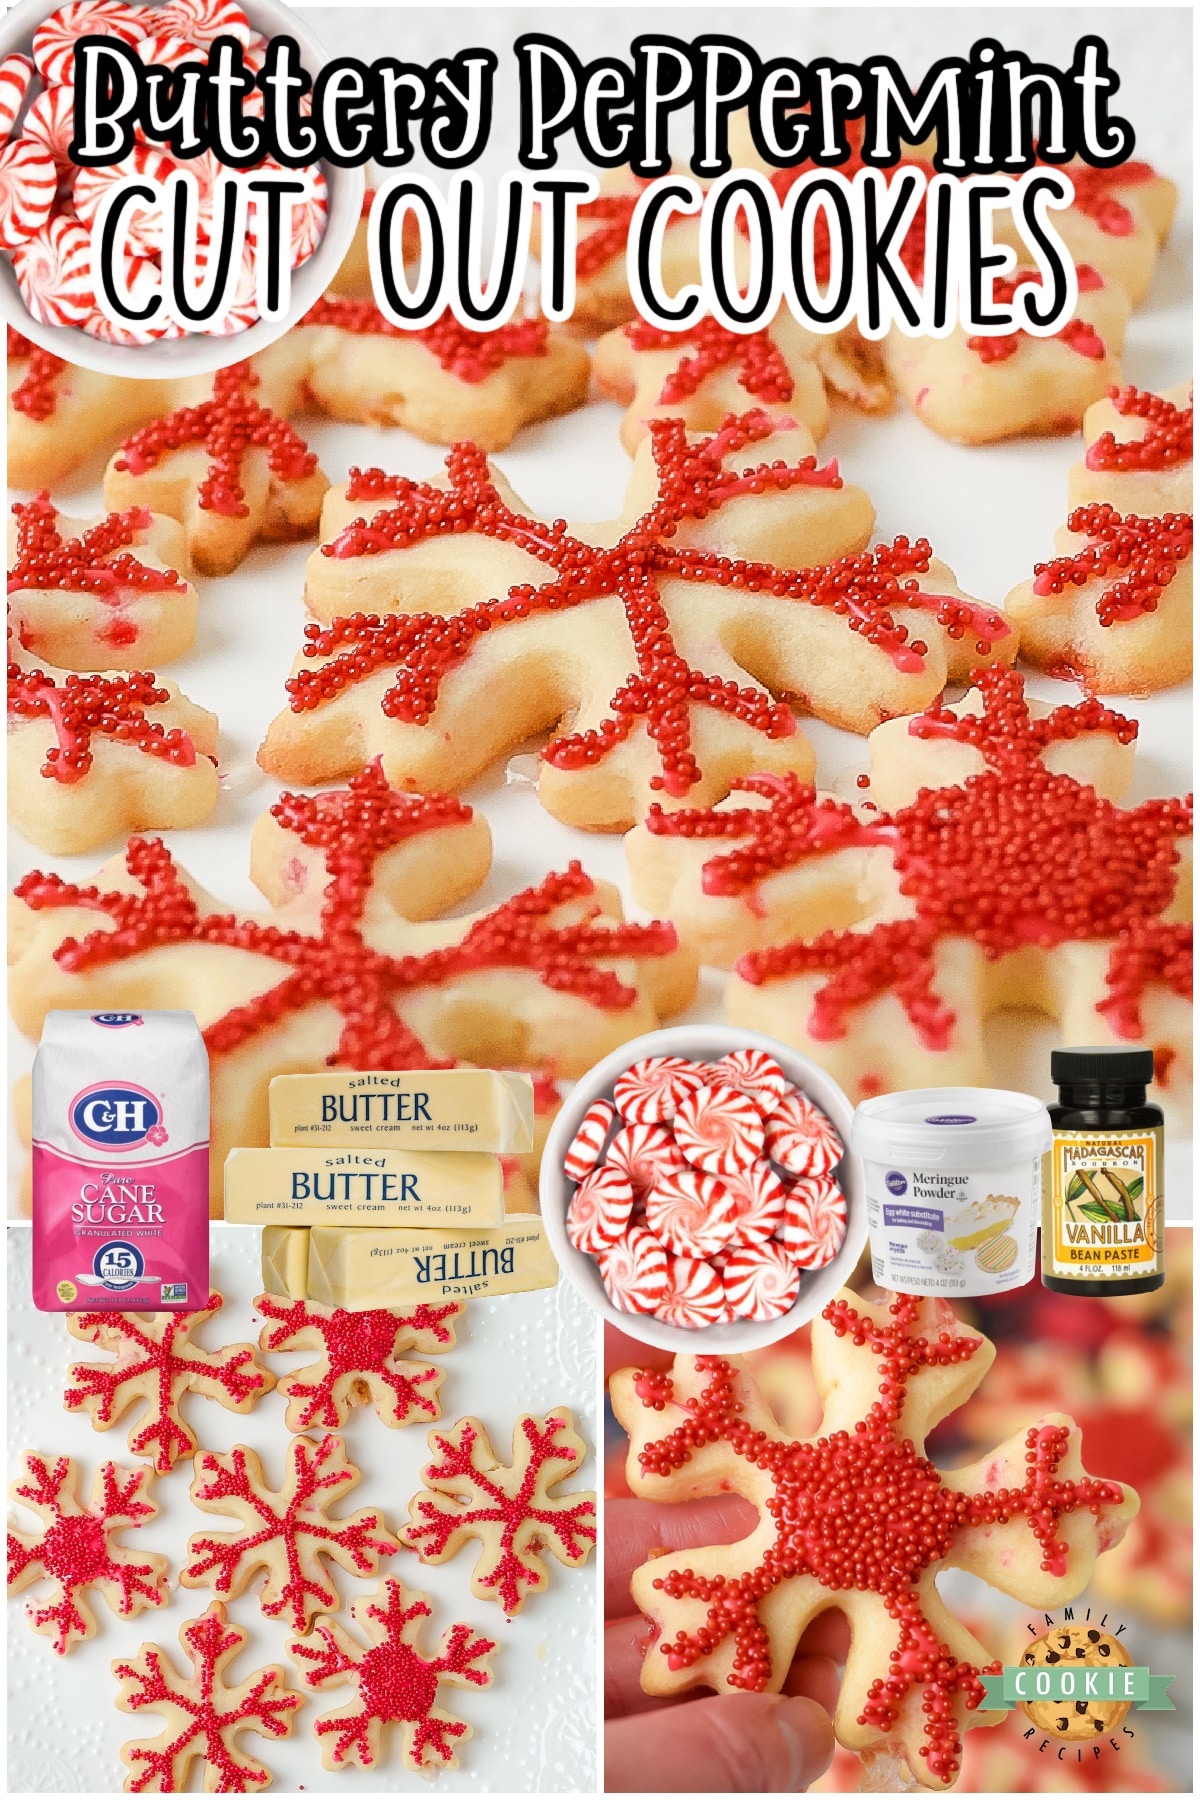 Peppermint Cutout cookies made with classic ingredients + crushed candy canes and a simple vanilla glaze! Buttery, festive cut out sugar cookies perfect for Christmas!